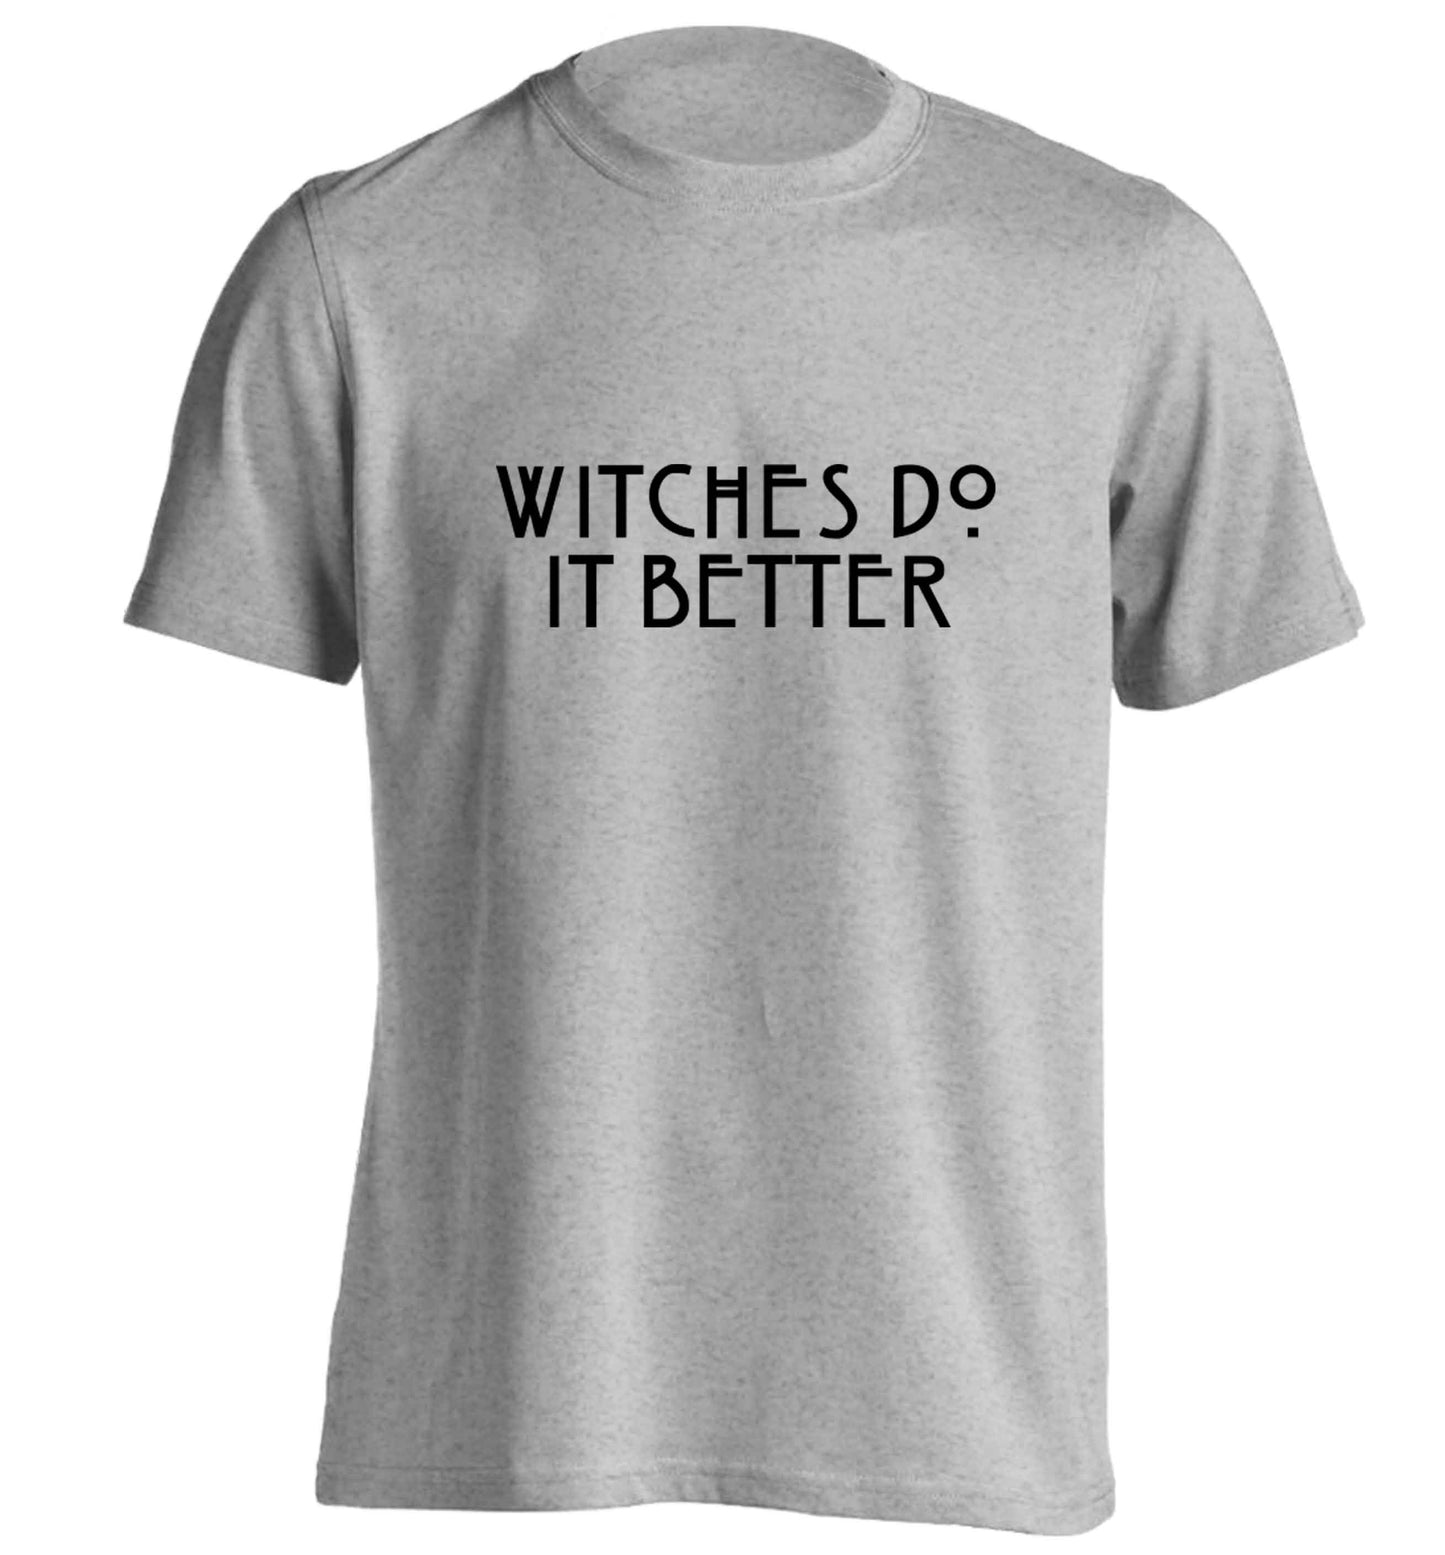 Witches do it better adults unisex grey Tshirt 2XL